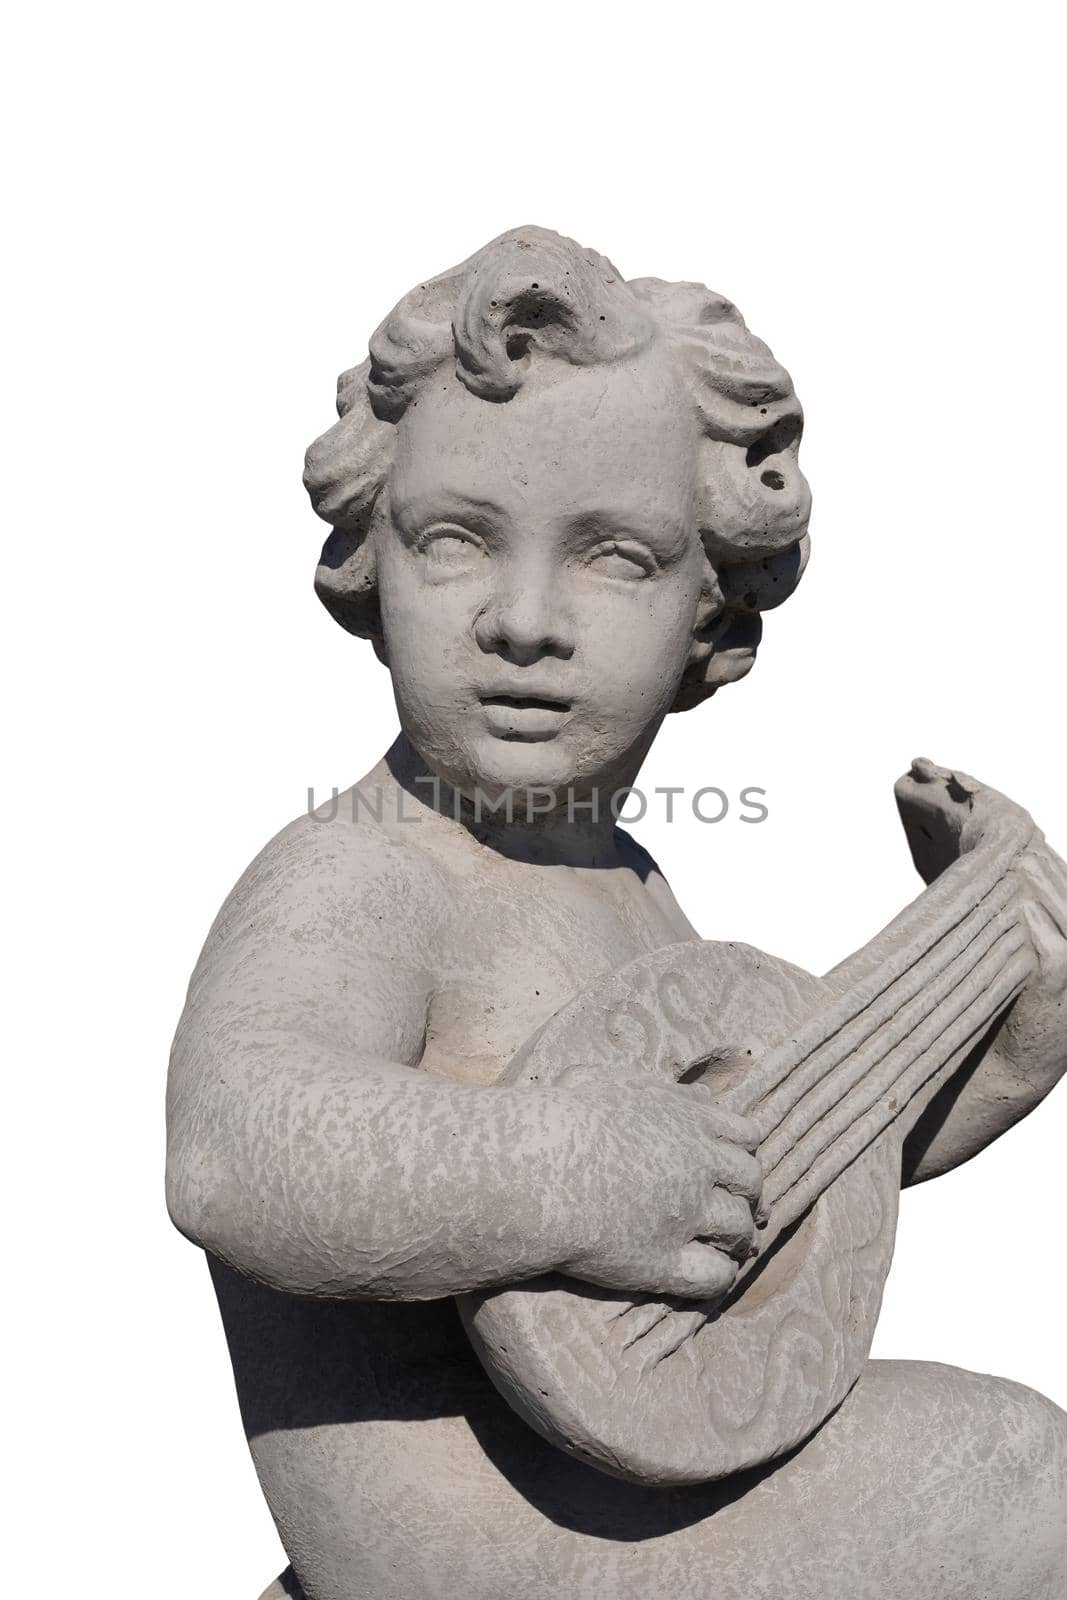 Close up of ancient stone sculpture of naked cherub playing lute on white background. art and classical style romantic figurative stone sculpture.